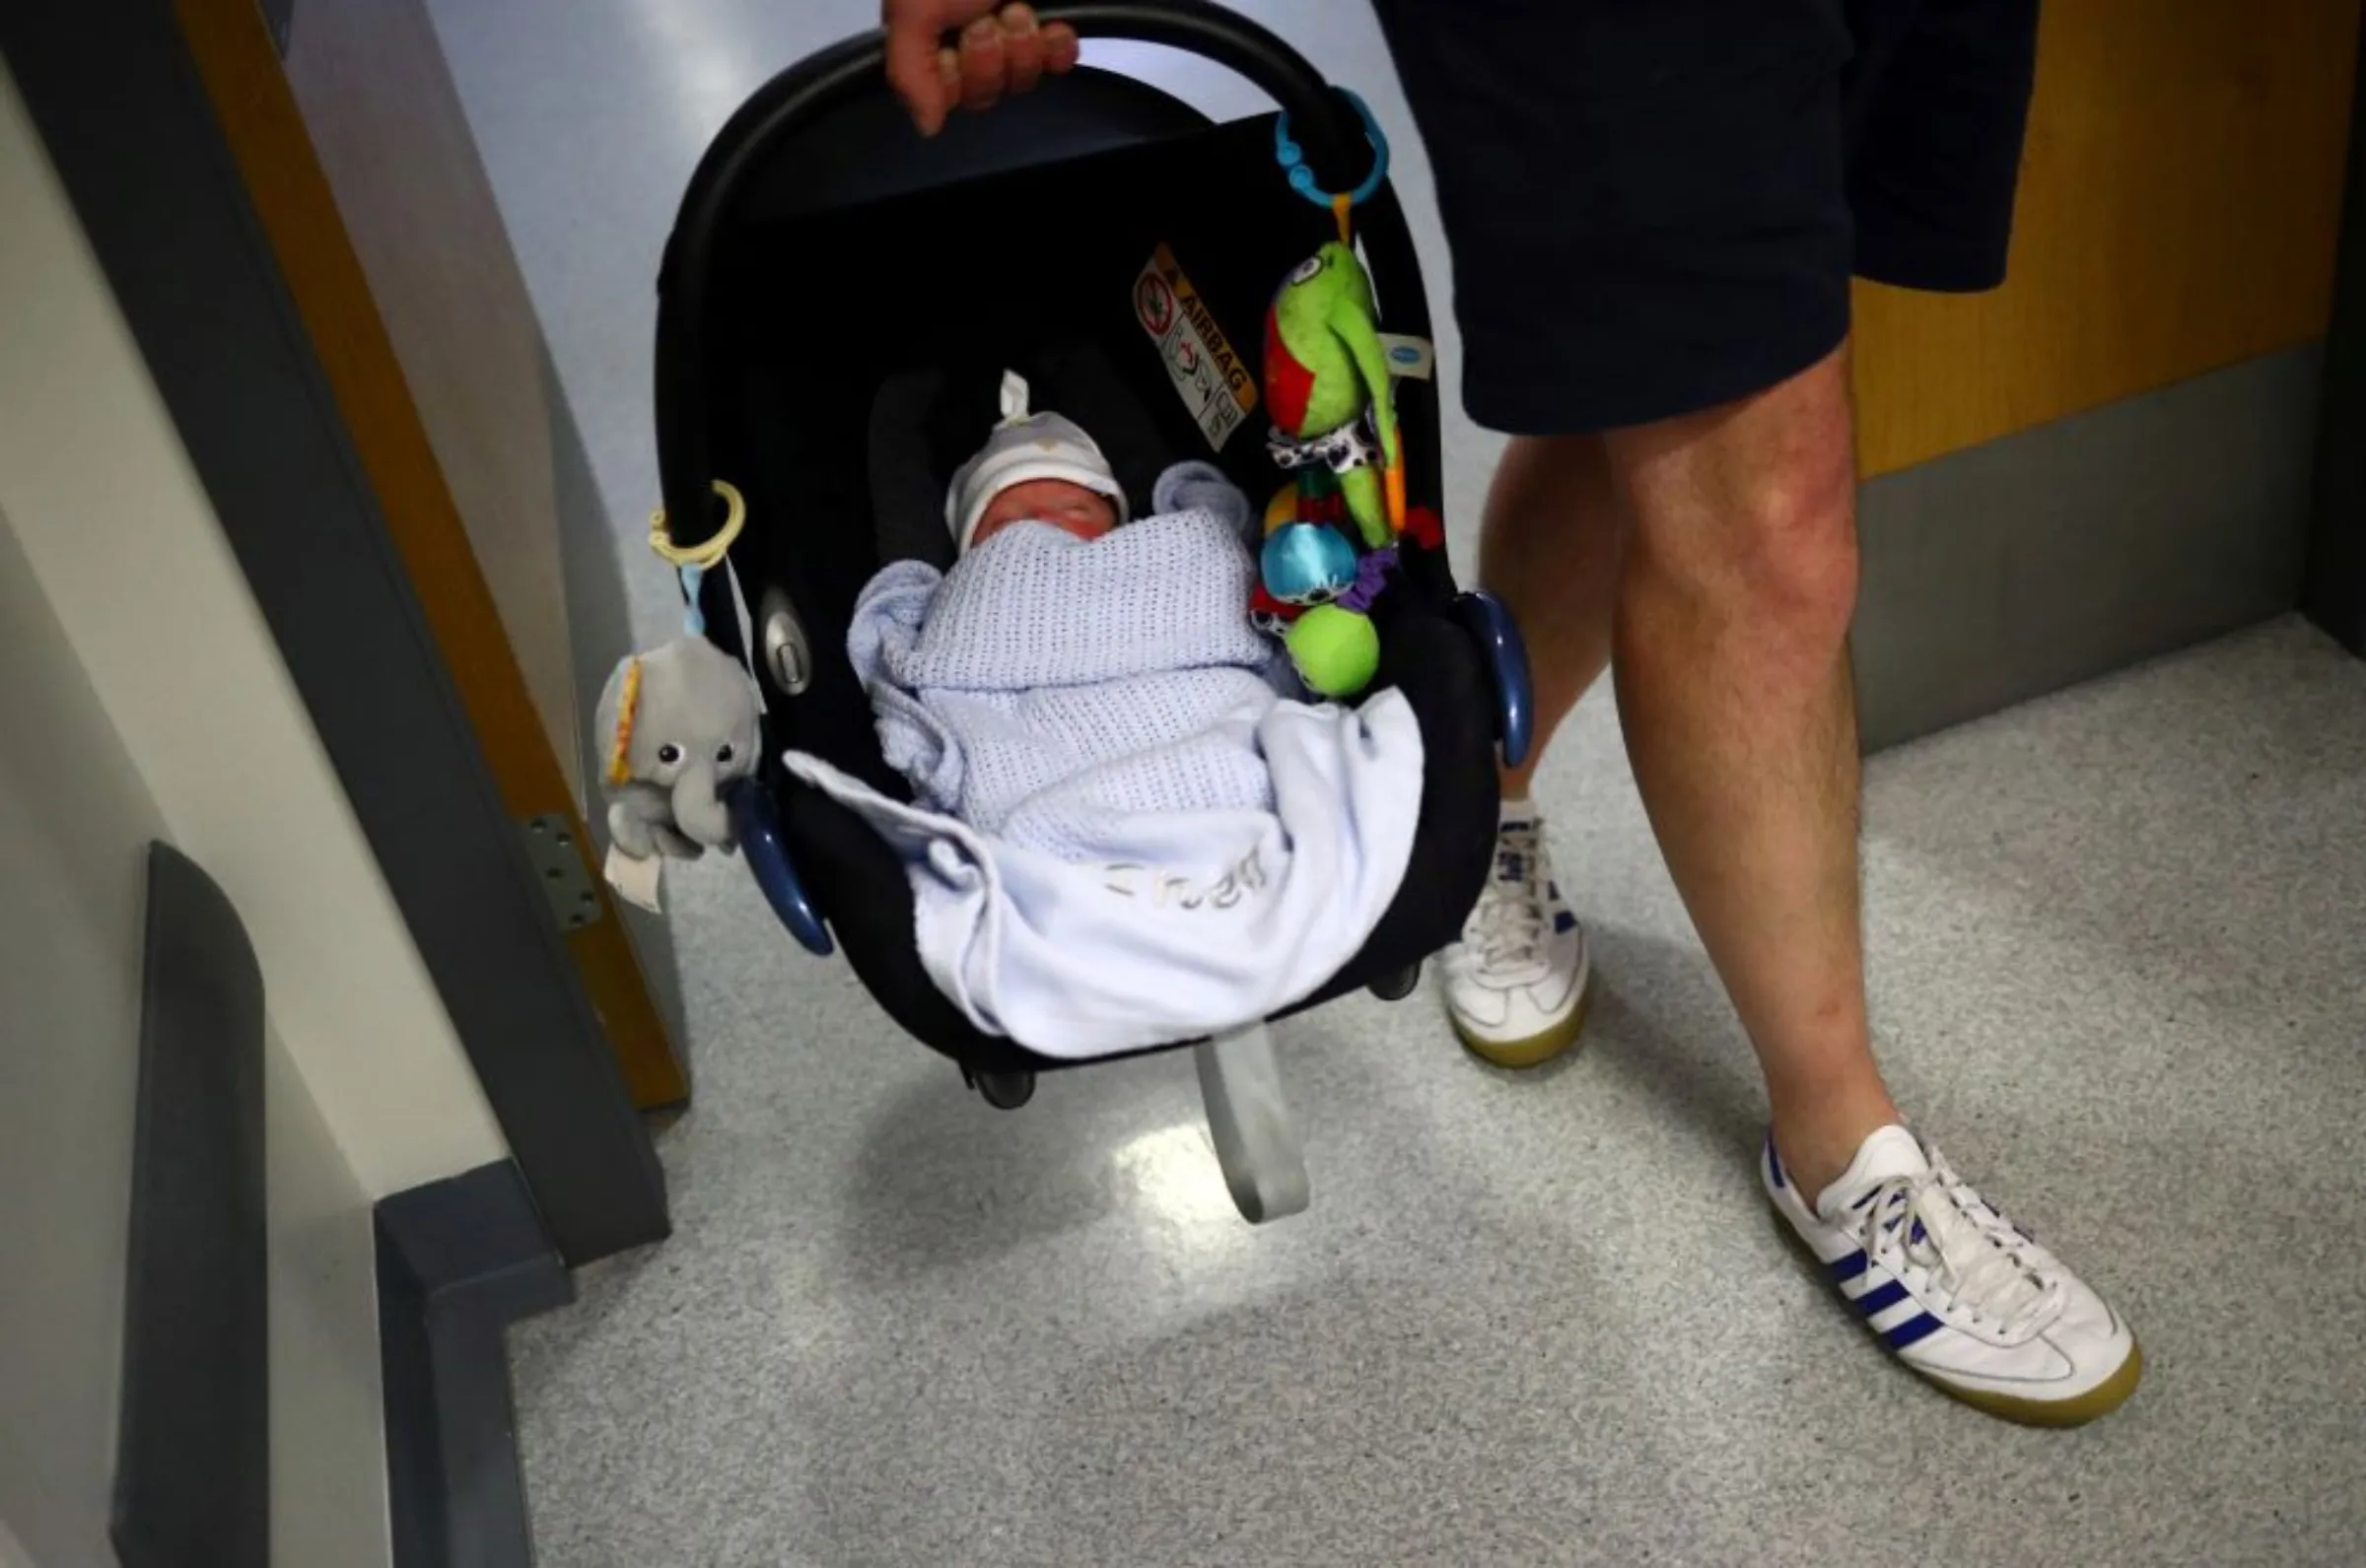 A baby who was born prematurely and is now nine weeks old, is carried in a car seat by his father as they leave hospital after being discharged from the Lancashire Women and Newborn Centre of Burnley General Hospital in East Lancashire, in Burnley, Britain, June 22, 2020